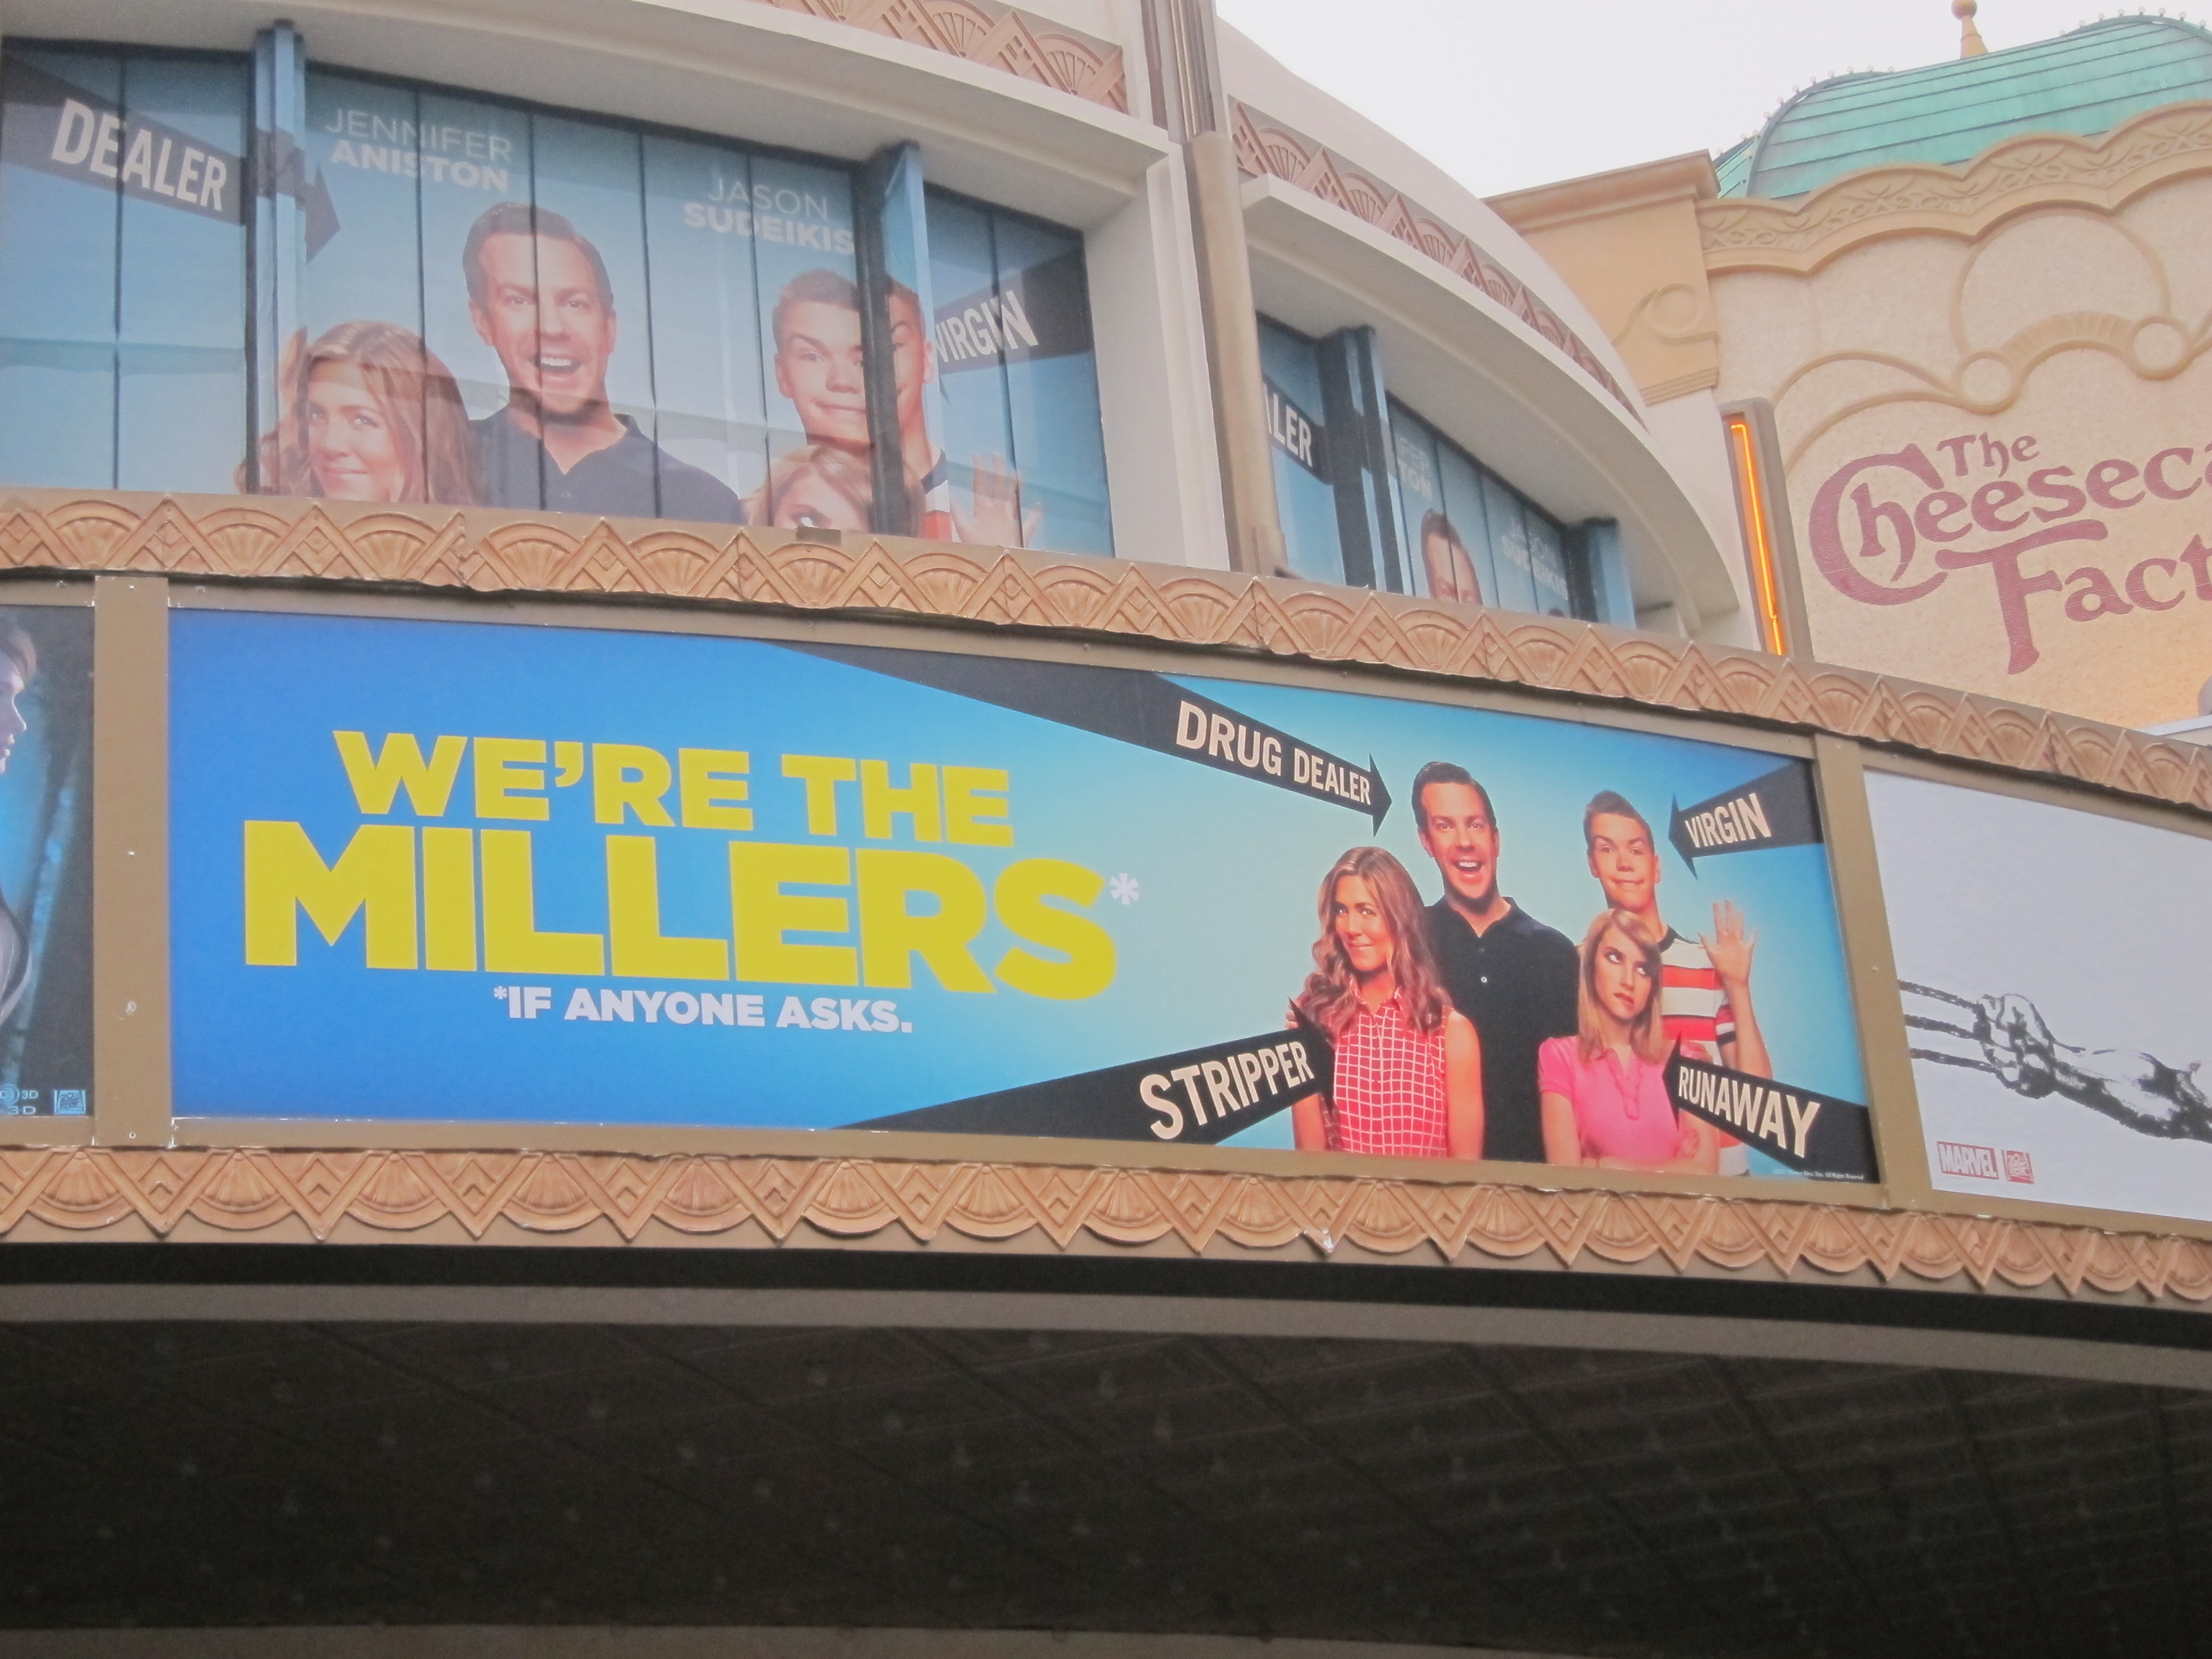 Custom marquee for WE'RE THE MILLERS at The Grove Theatre in Southern California.  Note the special window graphics above the custom marquee.